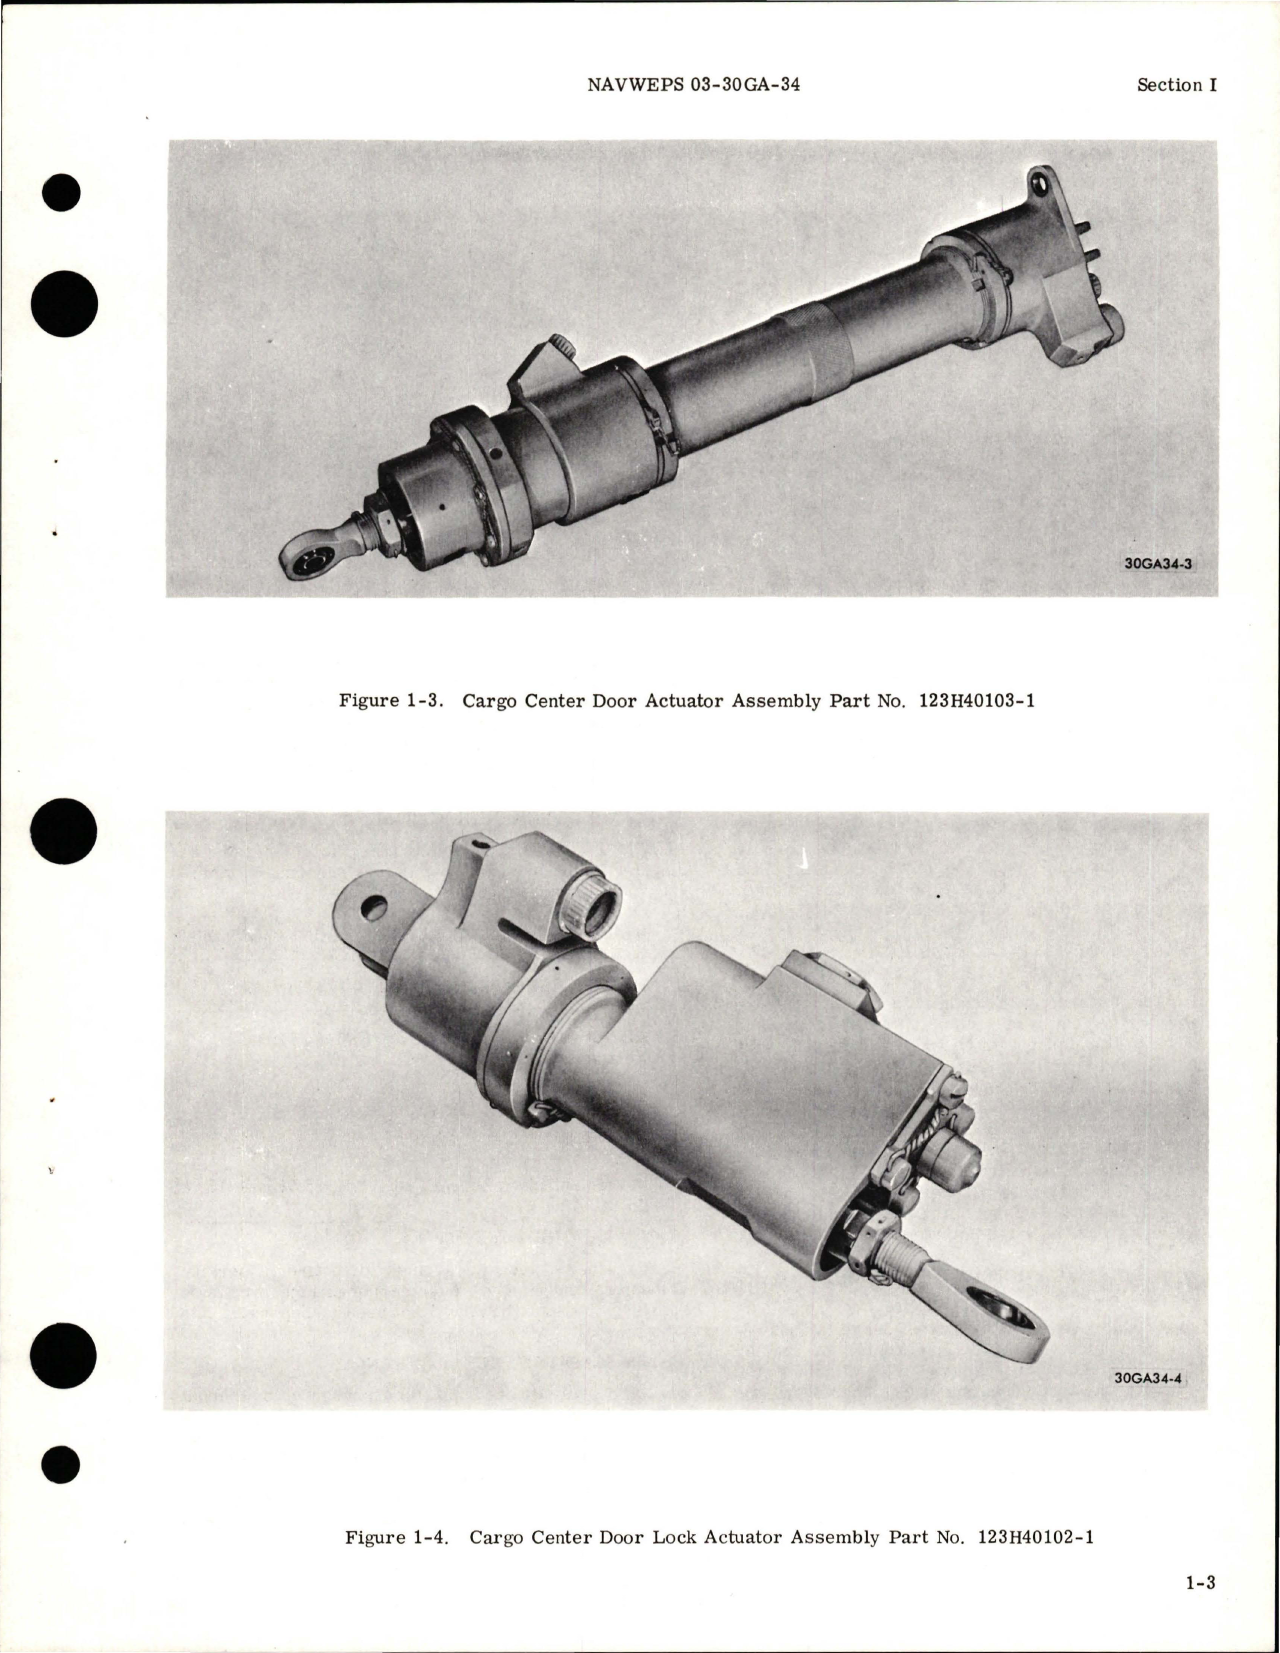 Sample page 9 from AirCorps Library document: Depot Maintenance for Nose Gear Actuating and Down Lock Cylinder, Cargo Center Door and Door Lock Actuator, Arresting Hook Accumulator - Lift Actuator - Dashpot and Truss, Tail Skid Lift Actuator